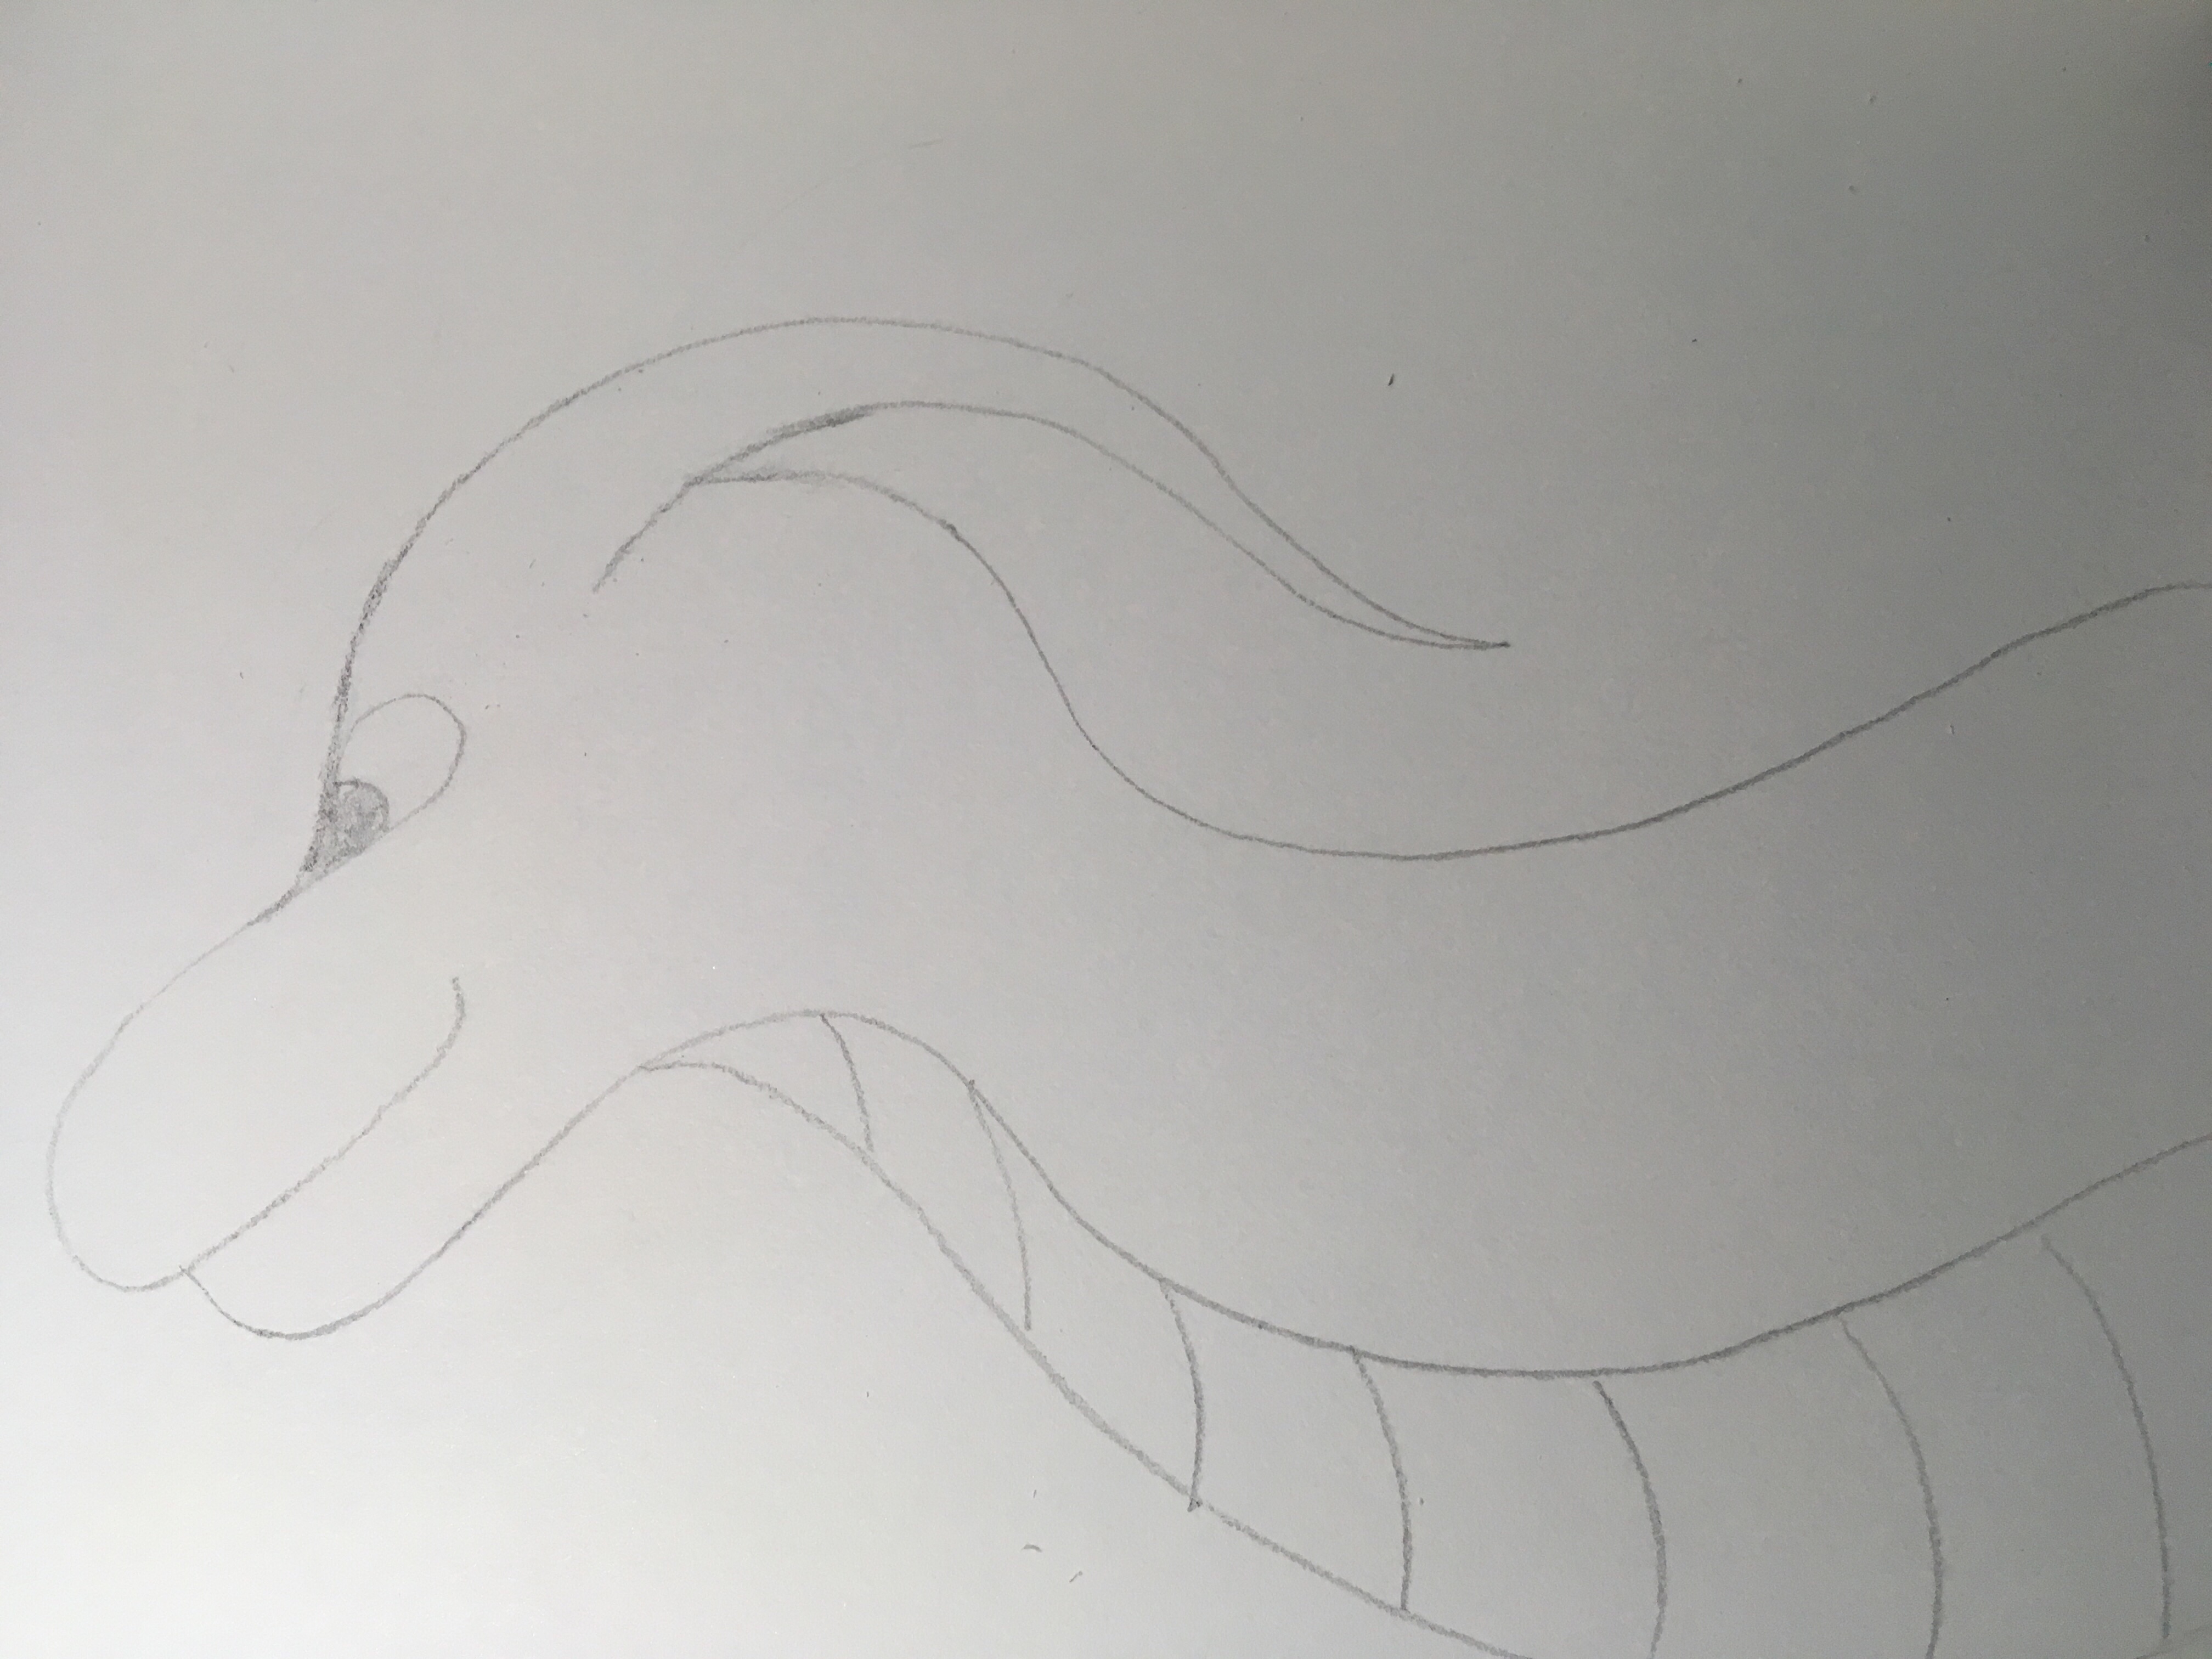 Possibly swimming dragon but it’s mostly unclear